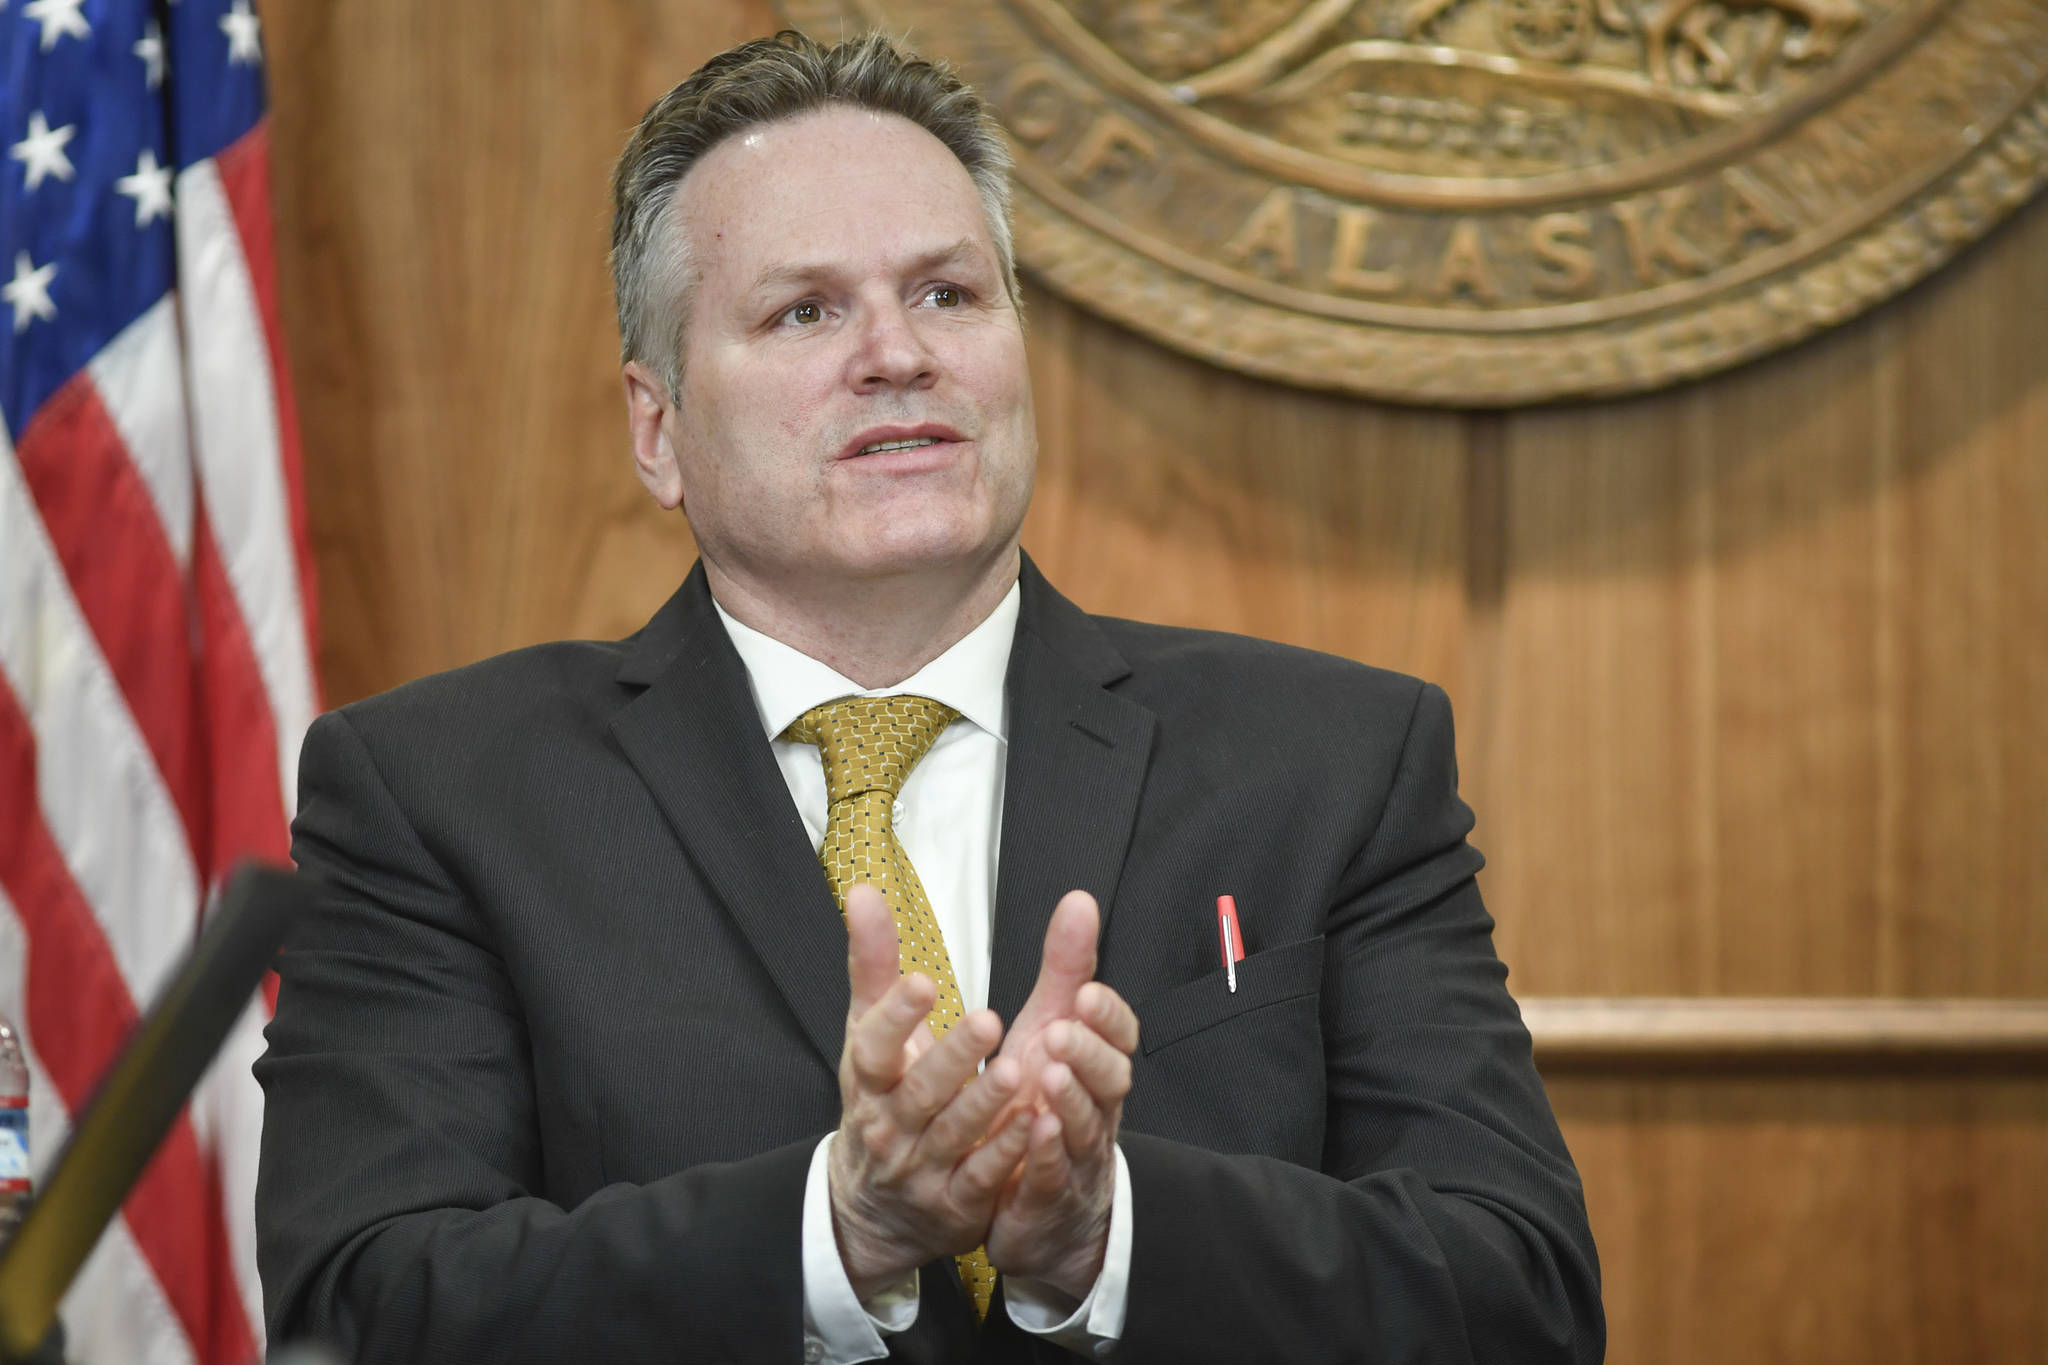 Gov. Mike Dunleavy speaks during a press conference at the Capitol on Tuesday, April 9, 2019. (Michael Penn | Juneau Empire)